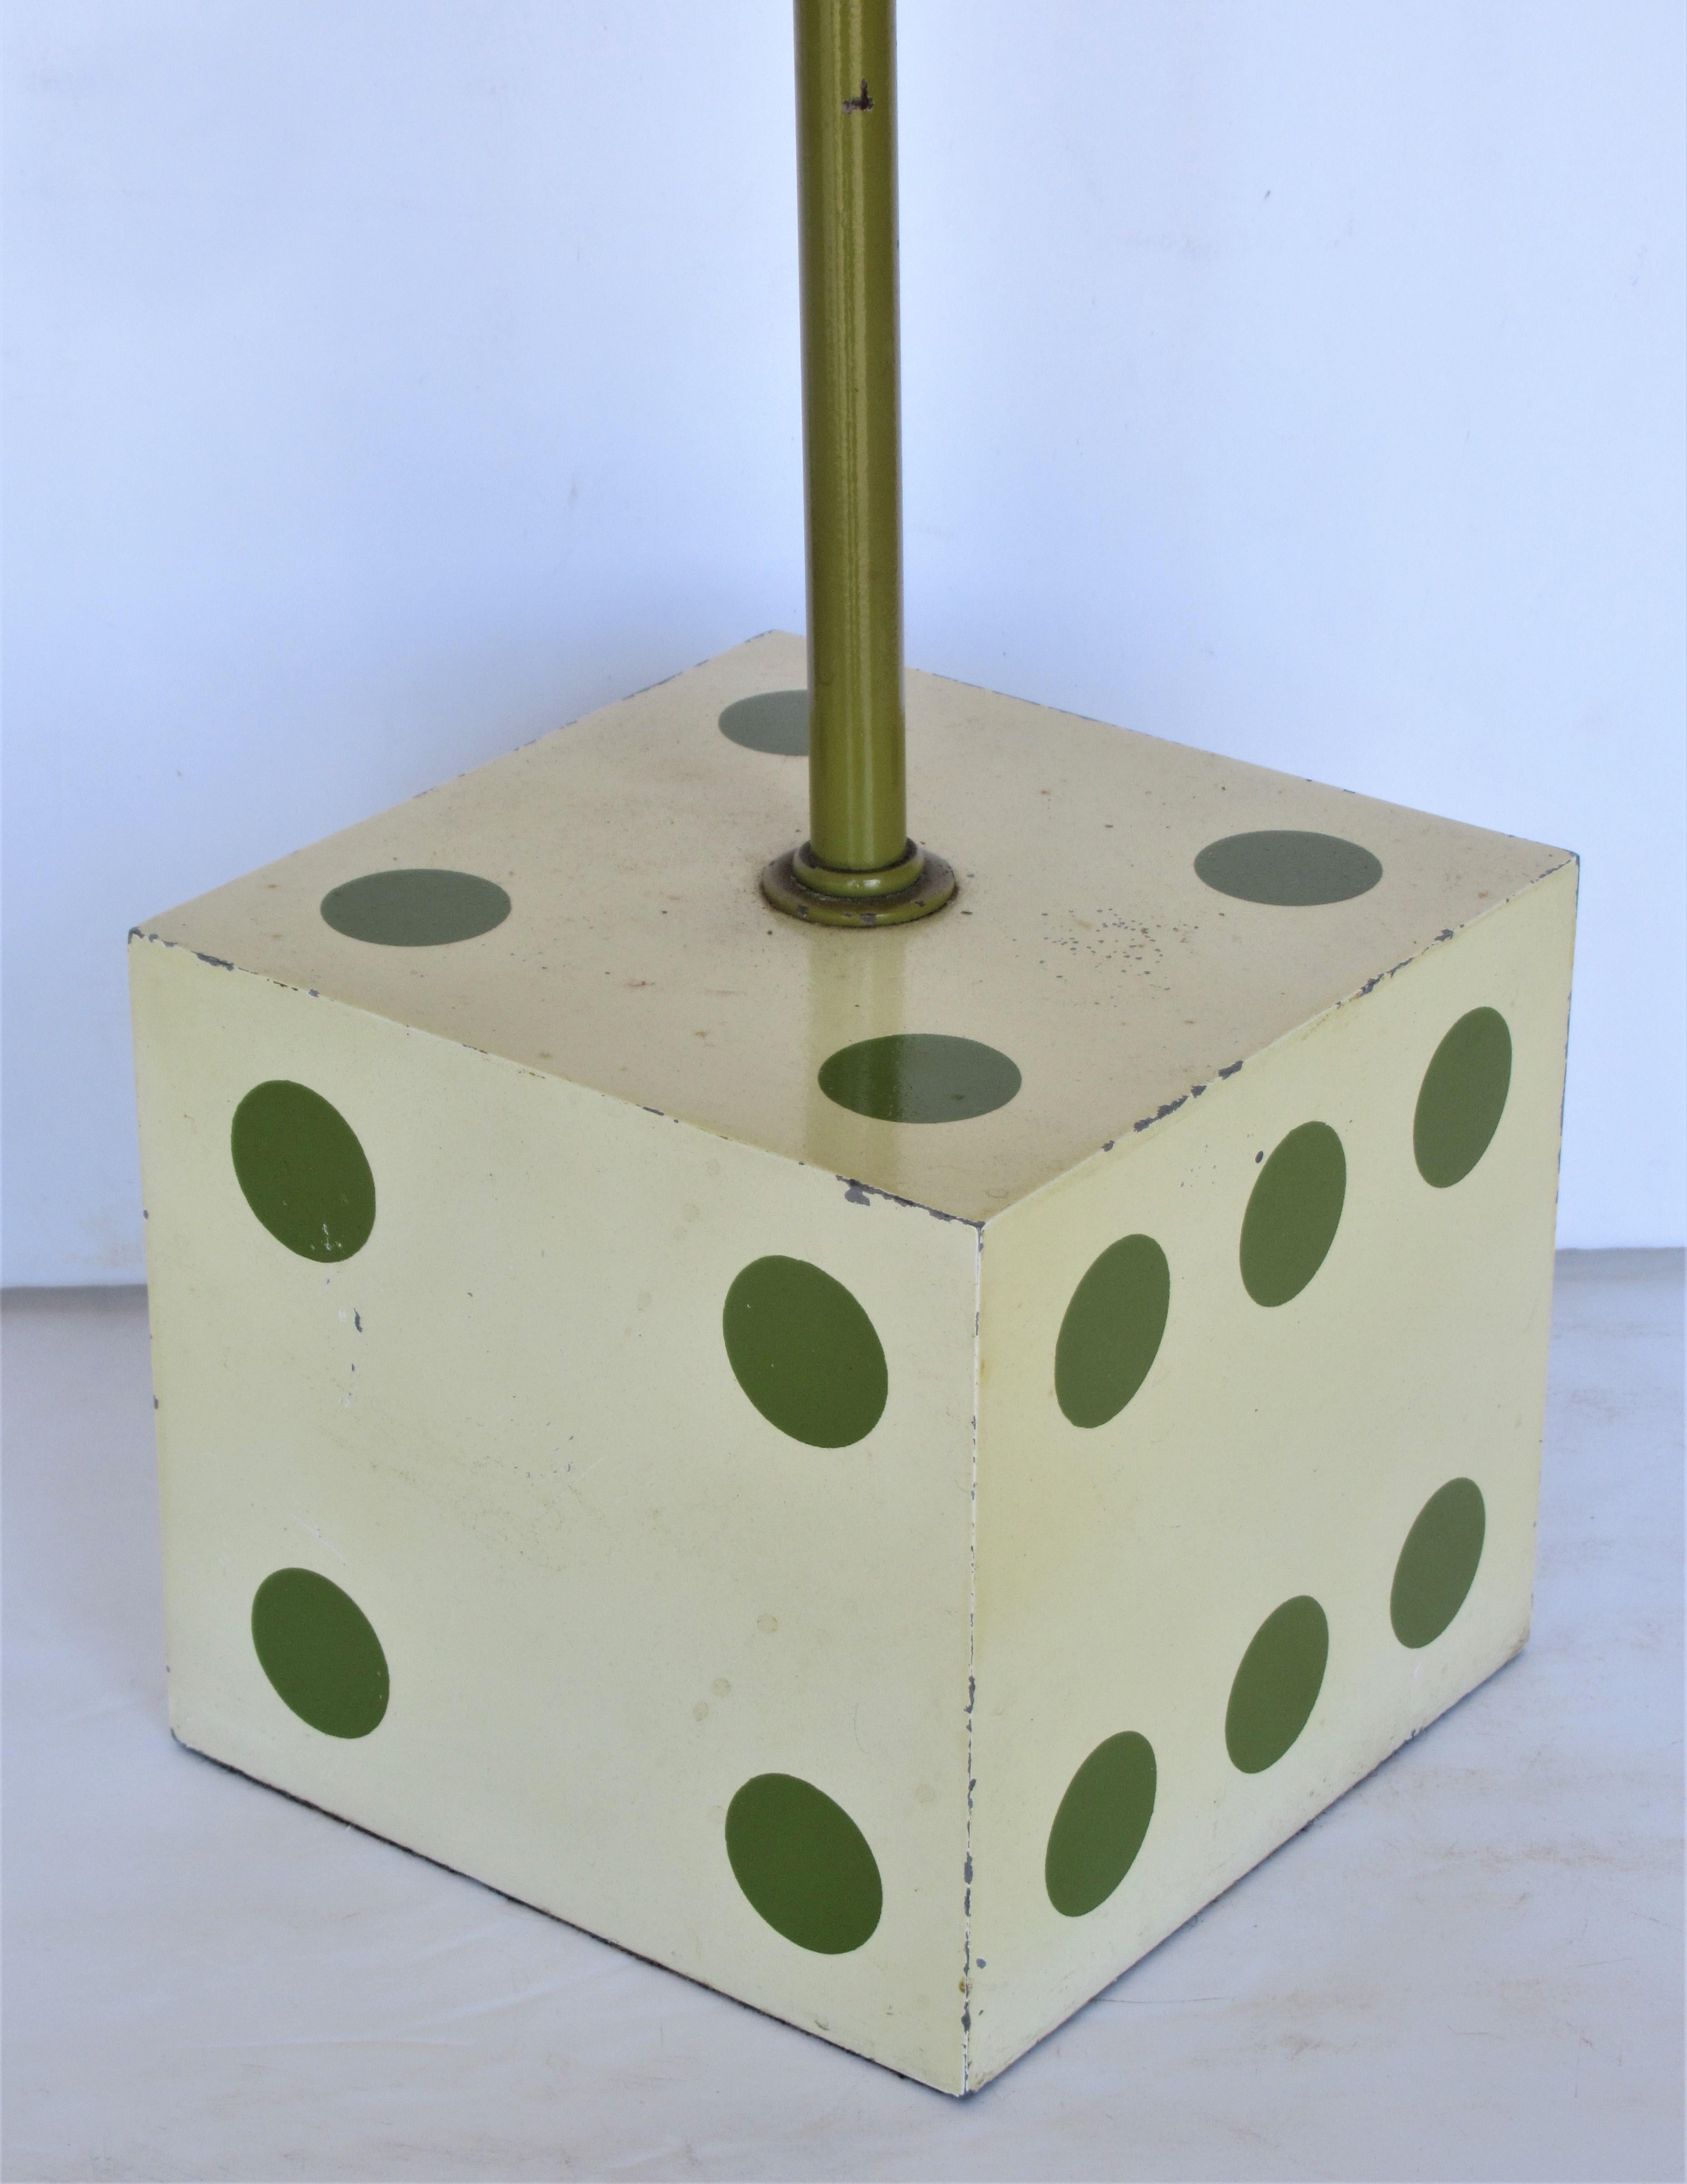 Mid 20th century modern table lamp with original factory enamel painted metal dice form base. Measures 24